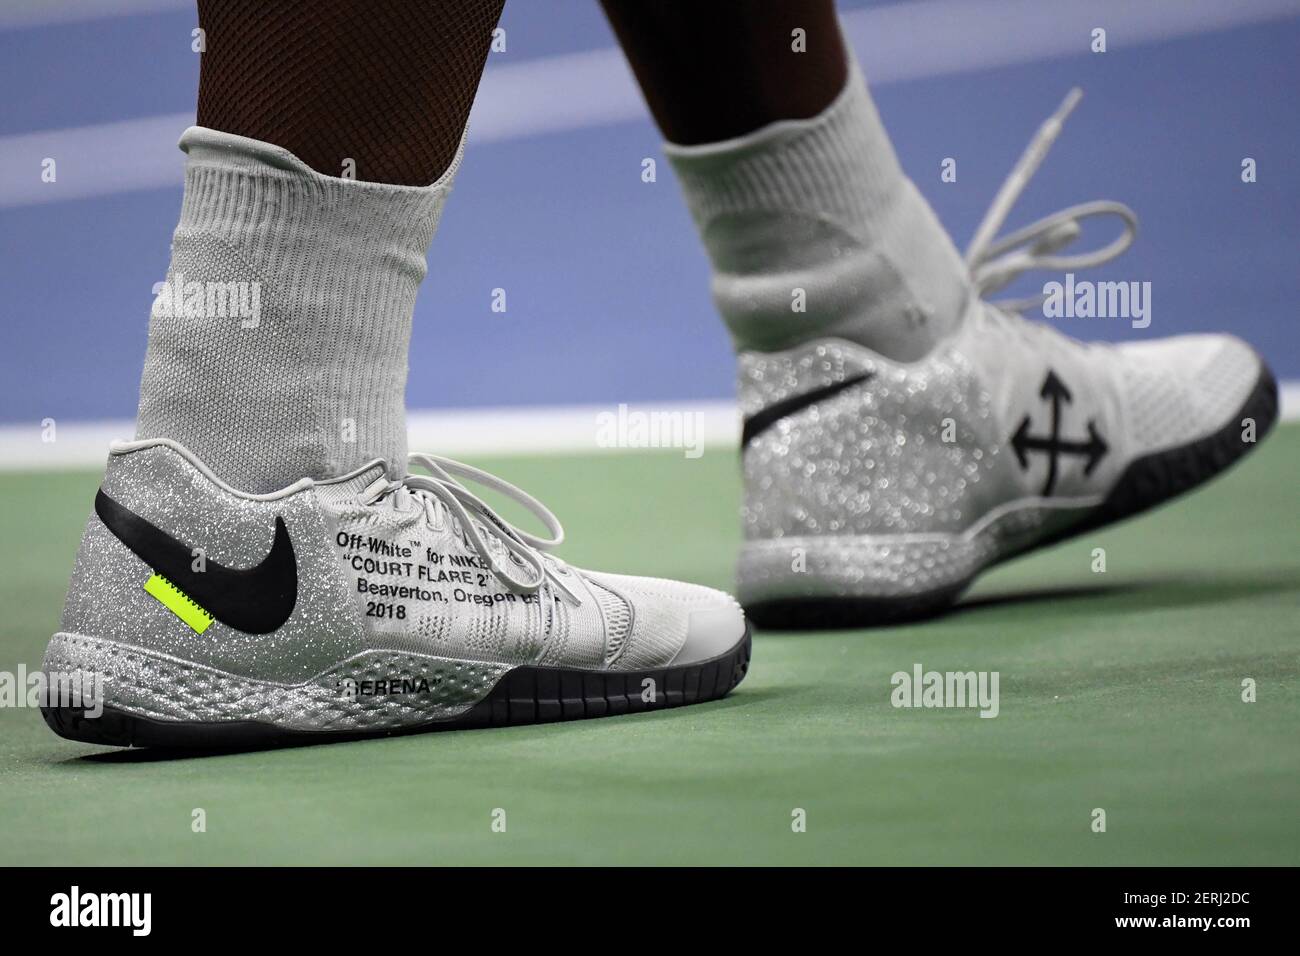 Aug 31, 2018; New York, NY, USA; Serena Williams' Nike shoes seen during a  third round match against her sister, Venus Williams, on day five of the  2018 U.S. Open tennis tournament